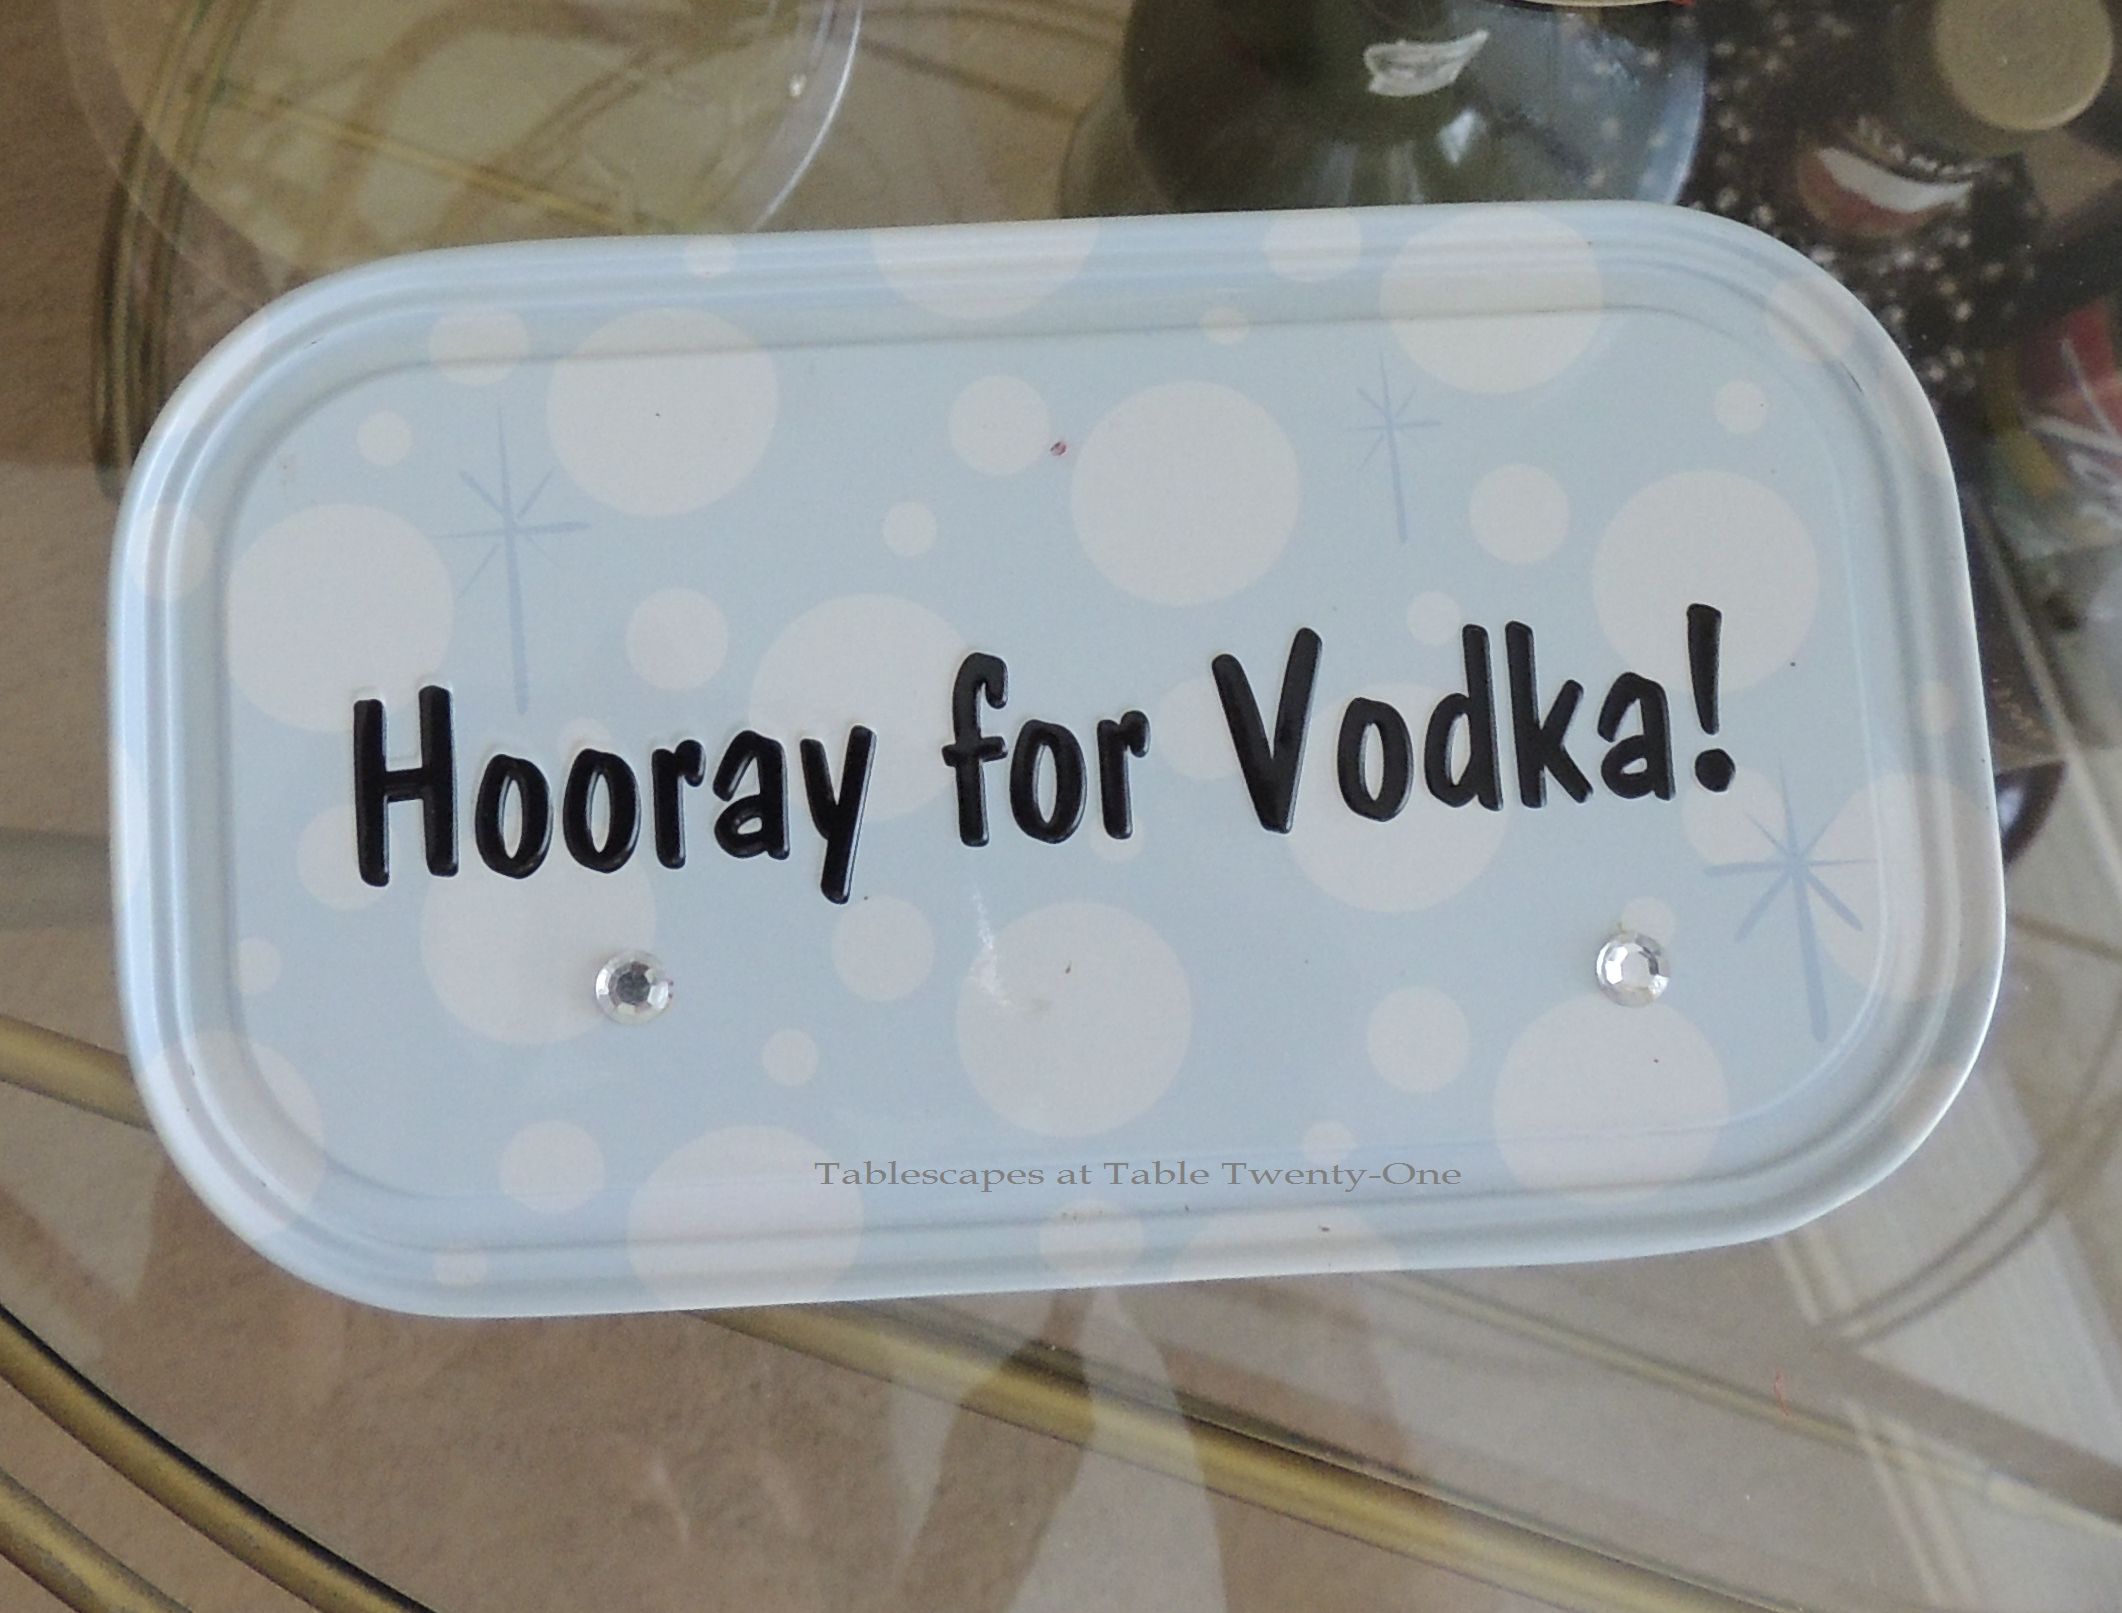 My niece bought me this fun placard a few years ago to celebrate my favorite libation.